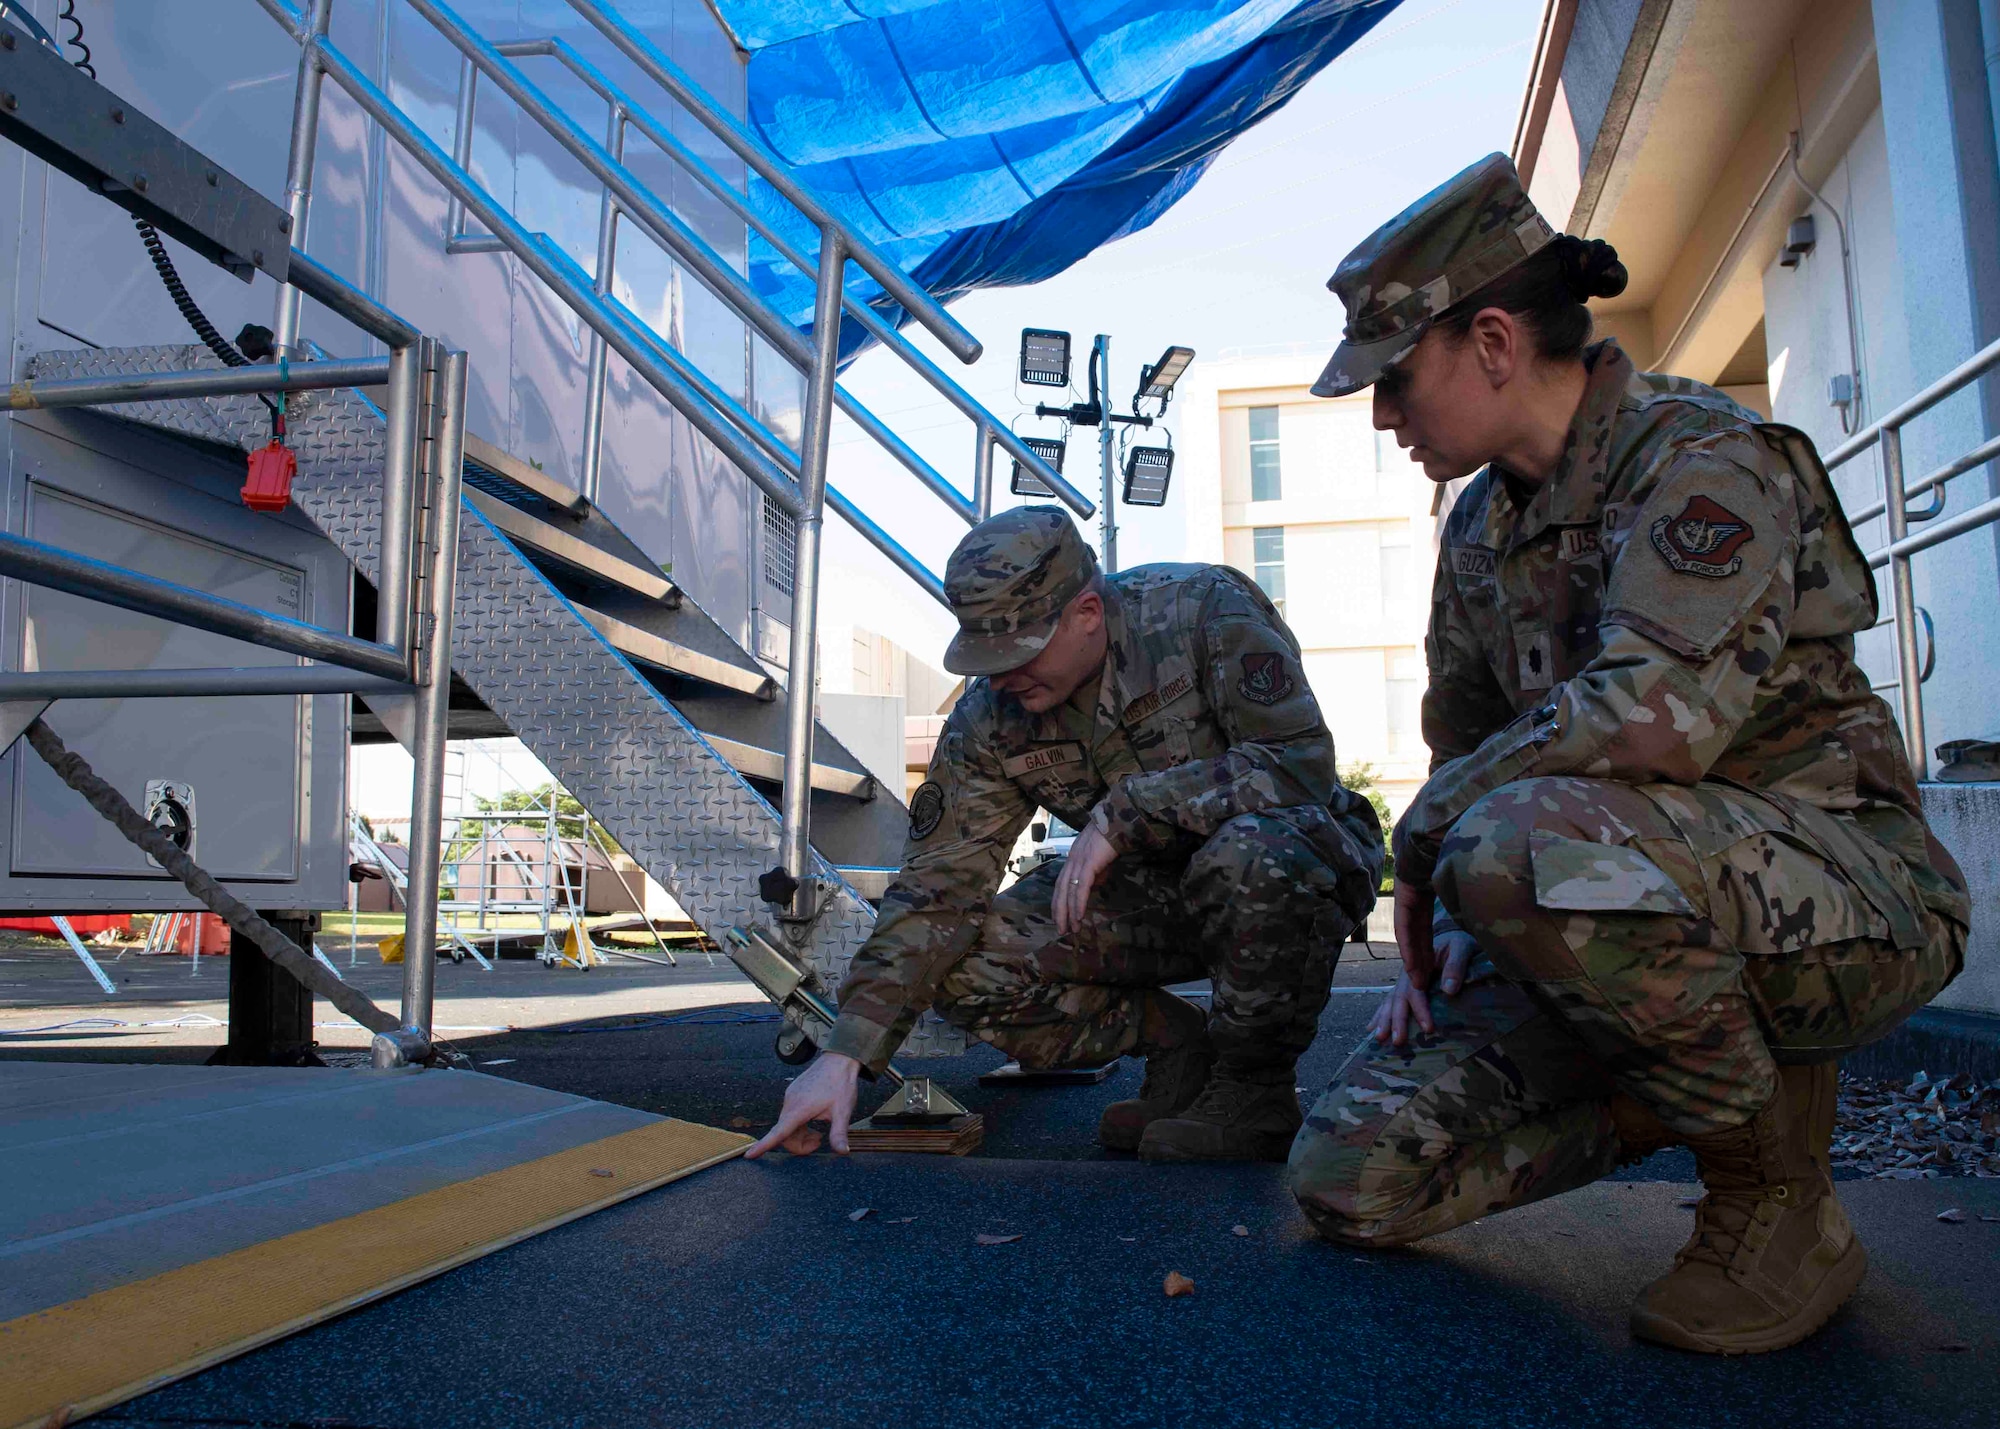 Master Sgt. Connor Galvin, 374th Medical Support Squadron section chief inventory control, left, conducts a safety inspection with Lt. Col. Lisa Guzman, 374th MDSS commander, at Yokota Air Base, Japan, Oct. 8, 2021.